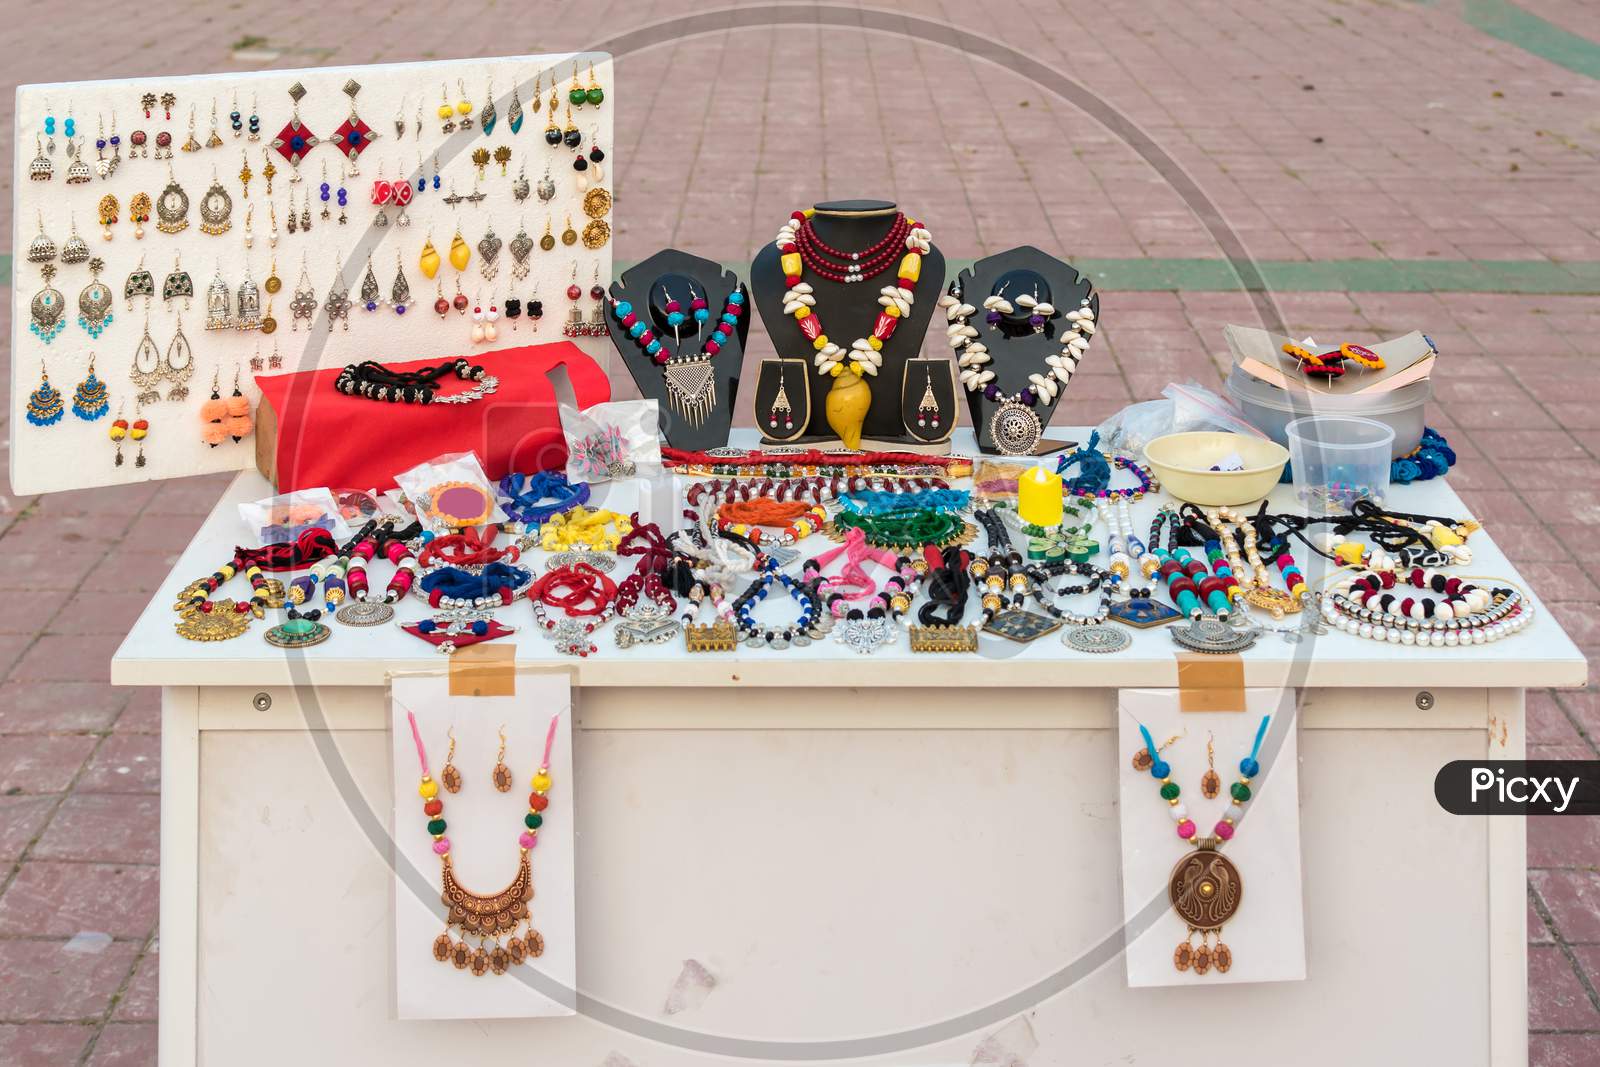 Picture Of Handmade Indian Necklace And Earring Is Displayed In A Street Shop For Sale. Indian Handicraft And Art